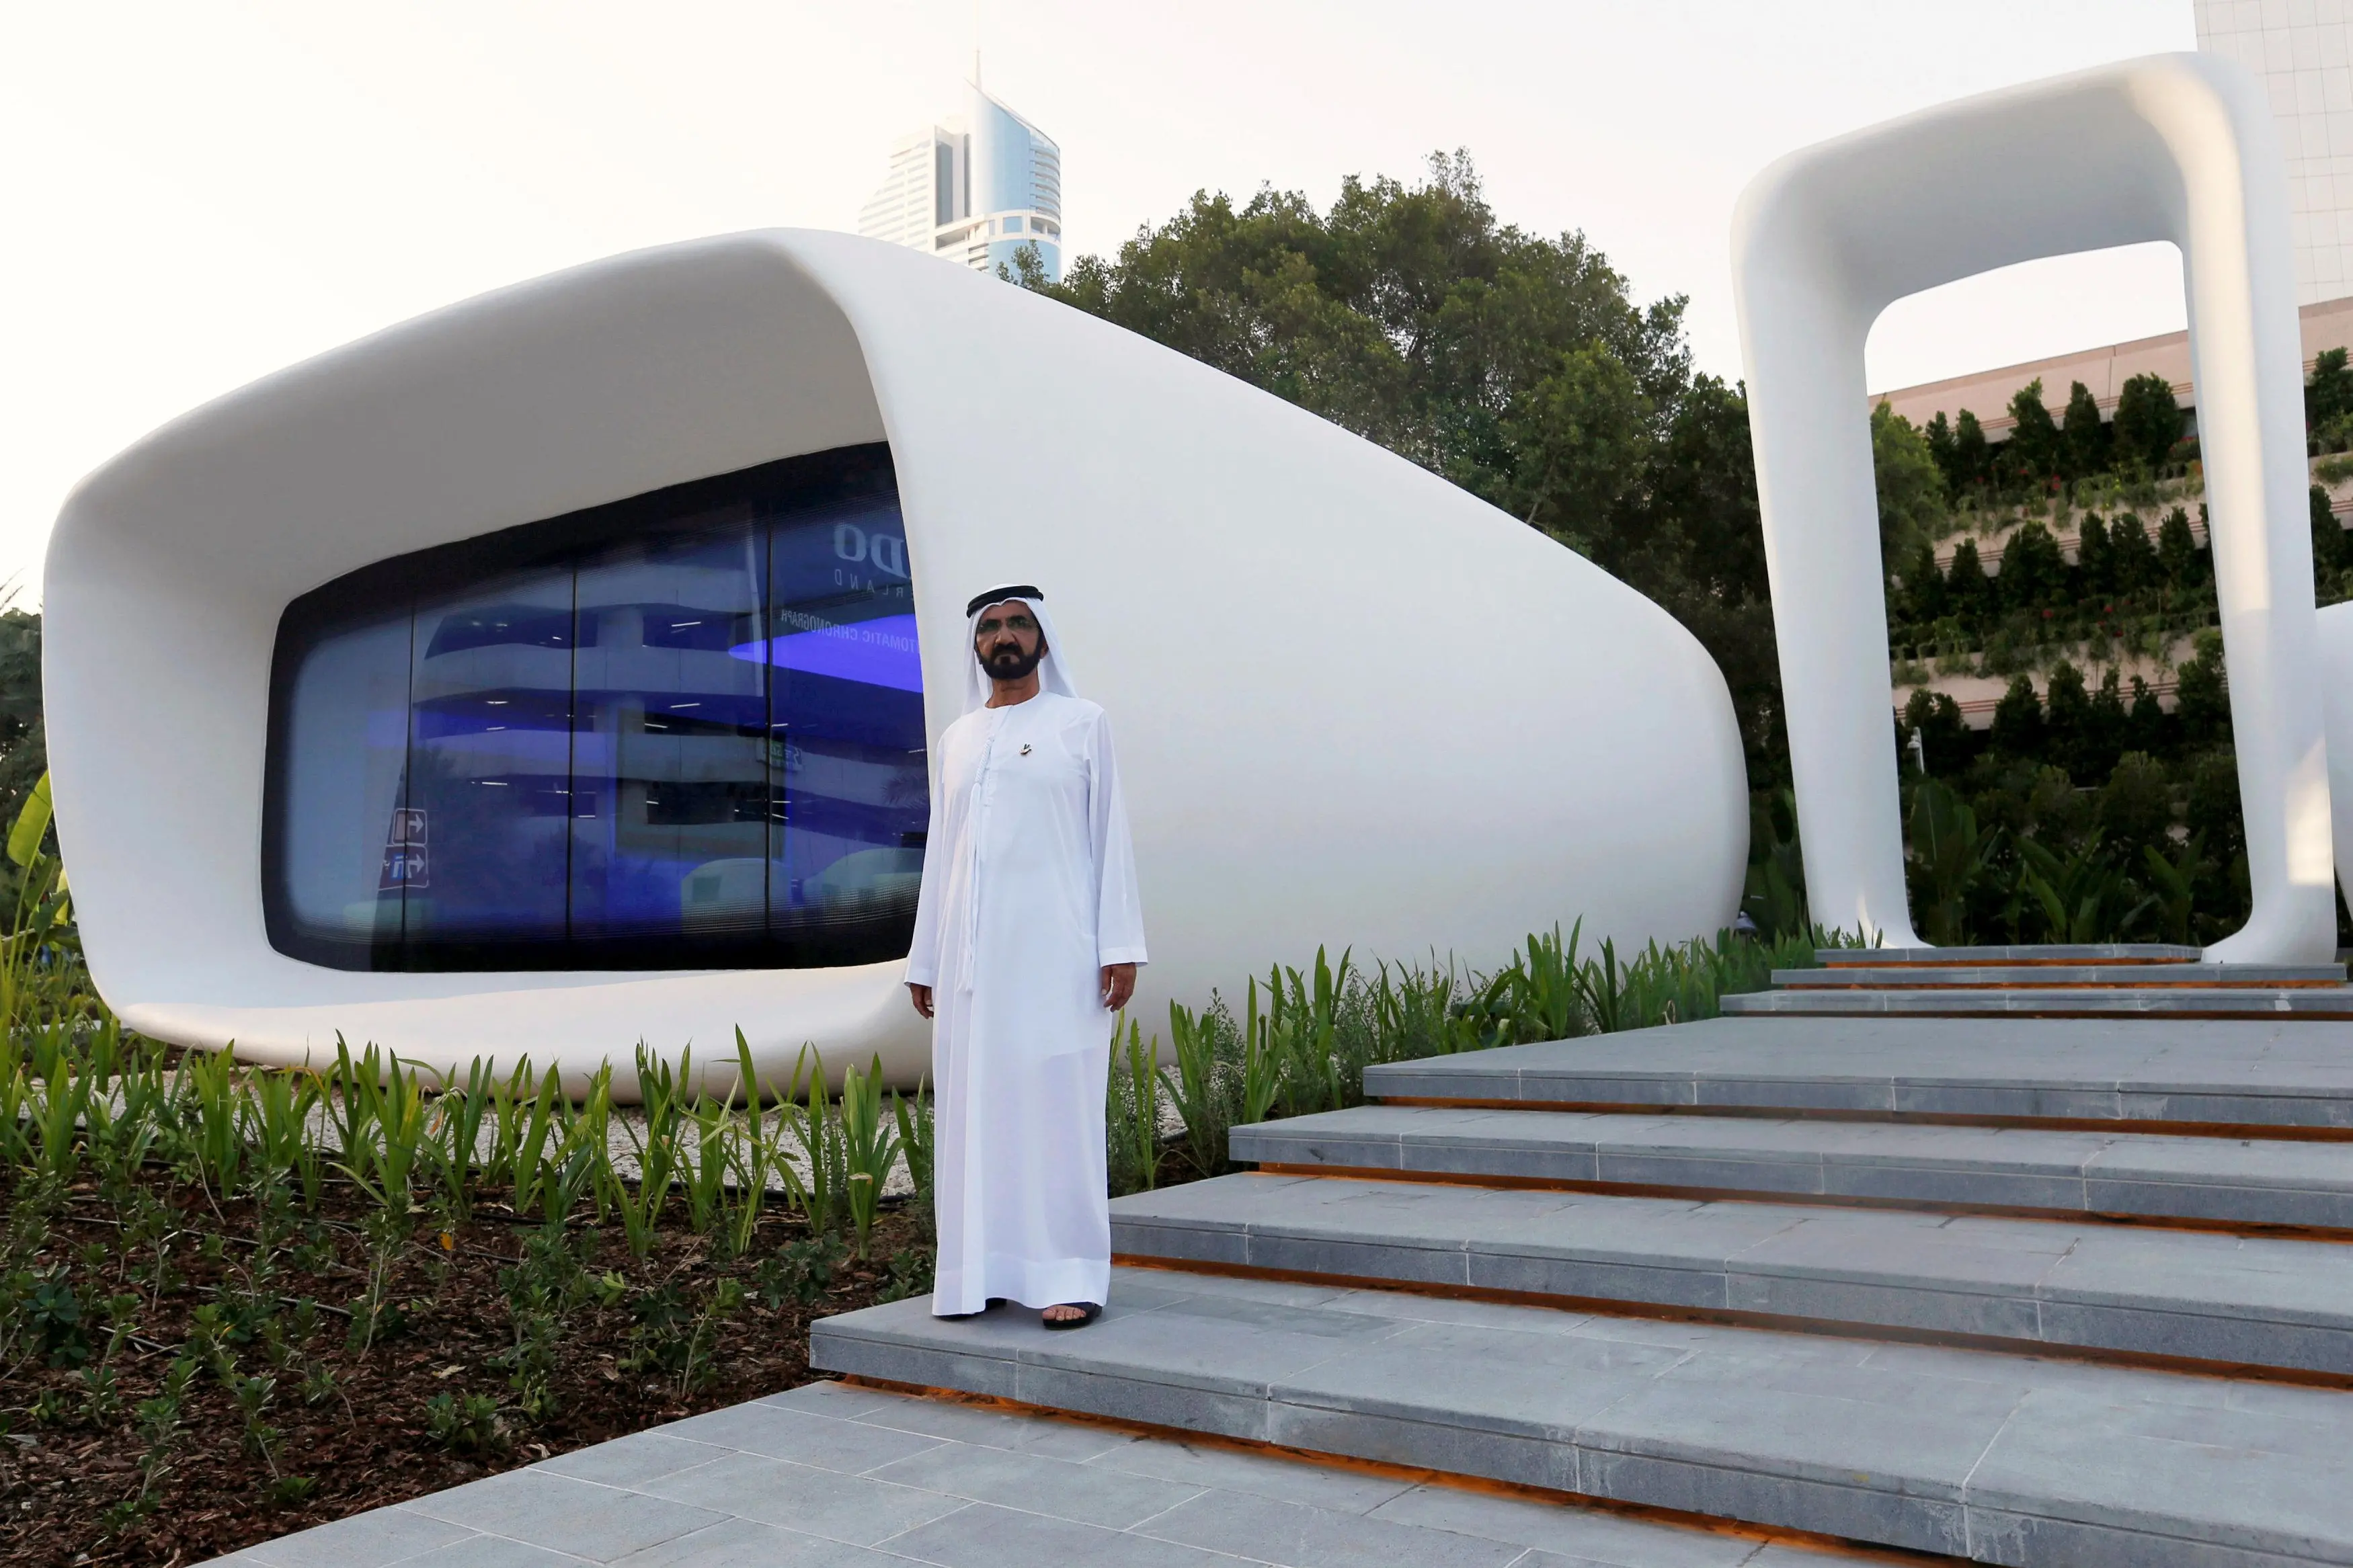 Dubai says opens world's first functioning 3D-printed office